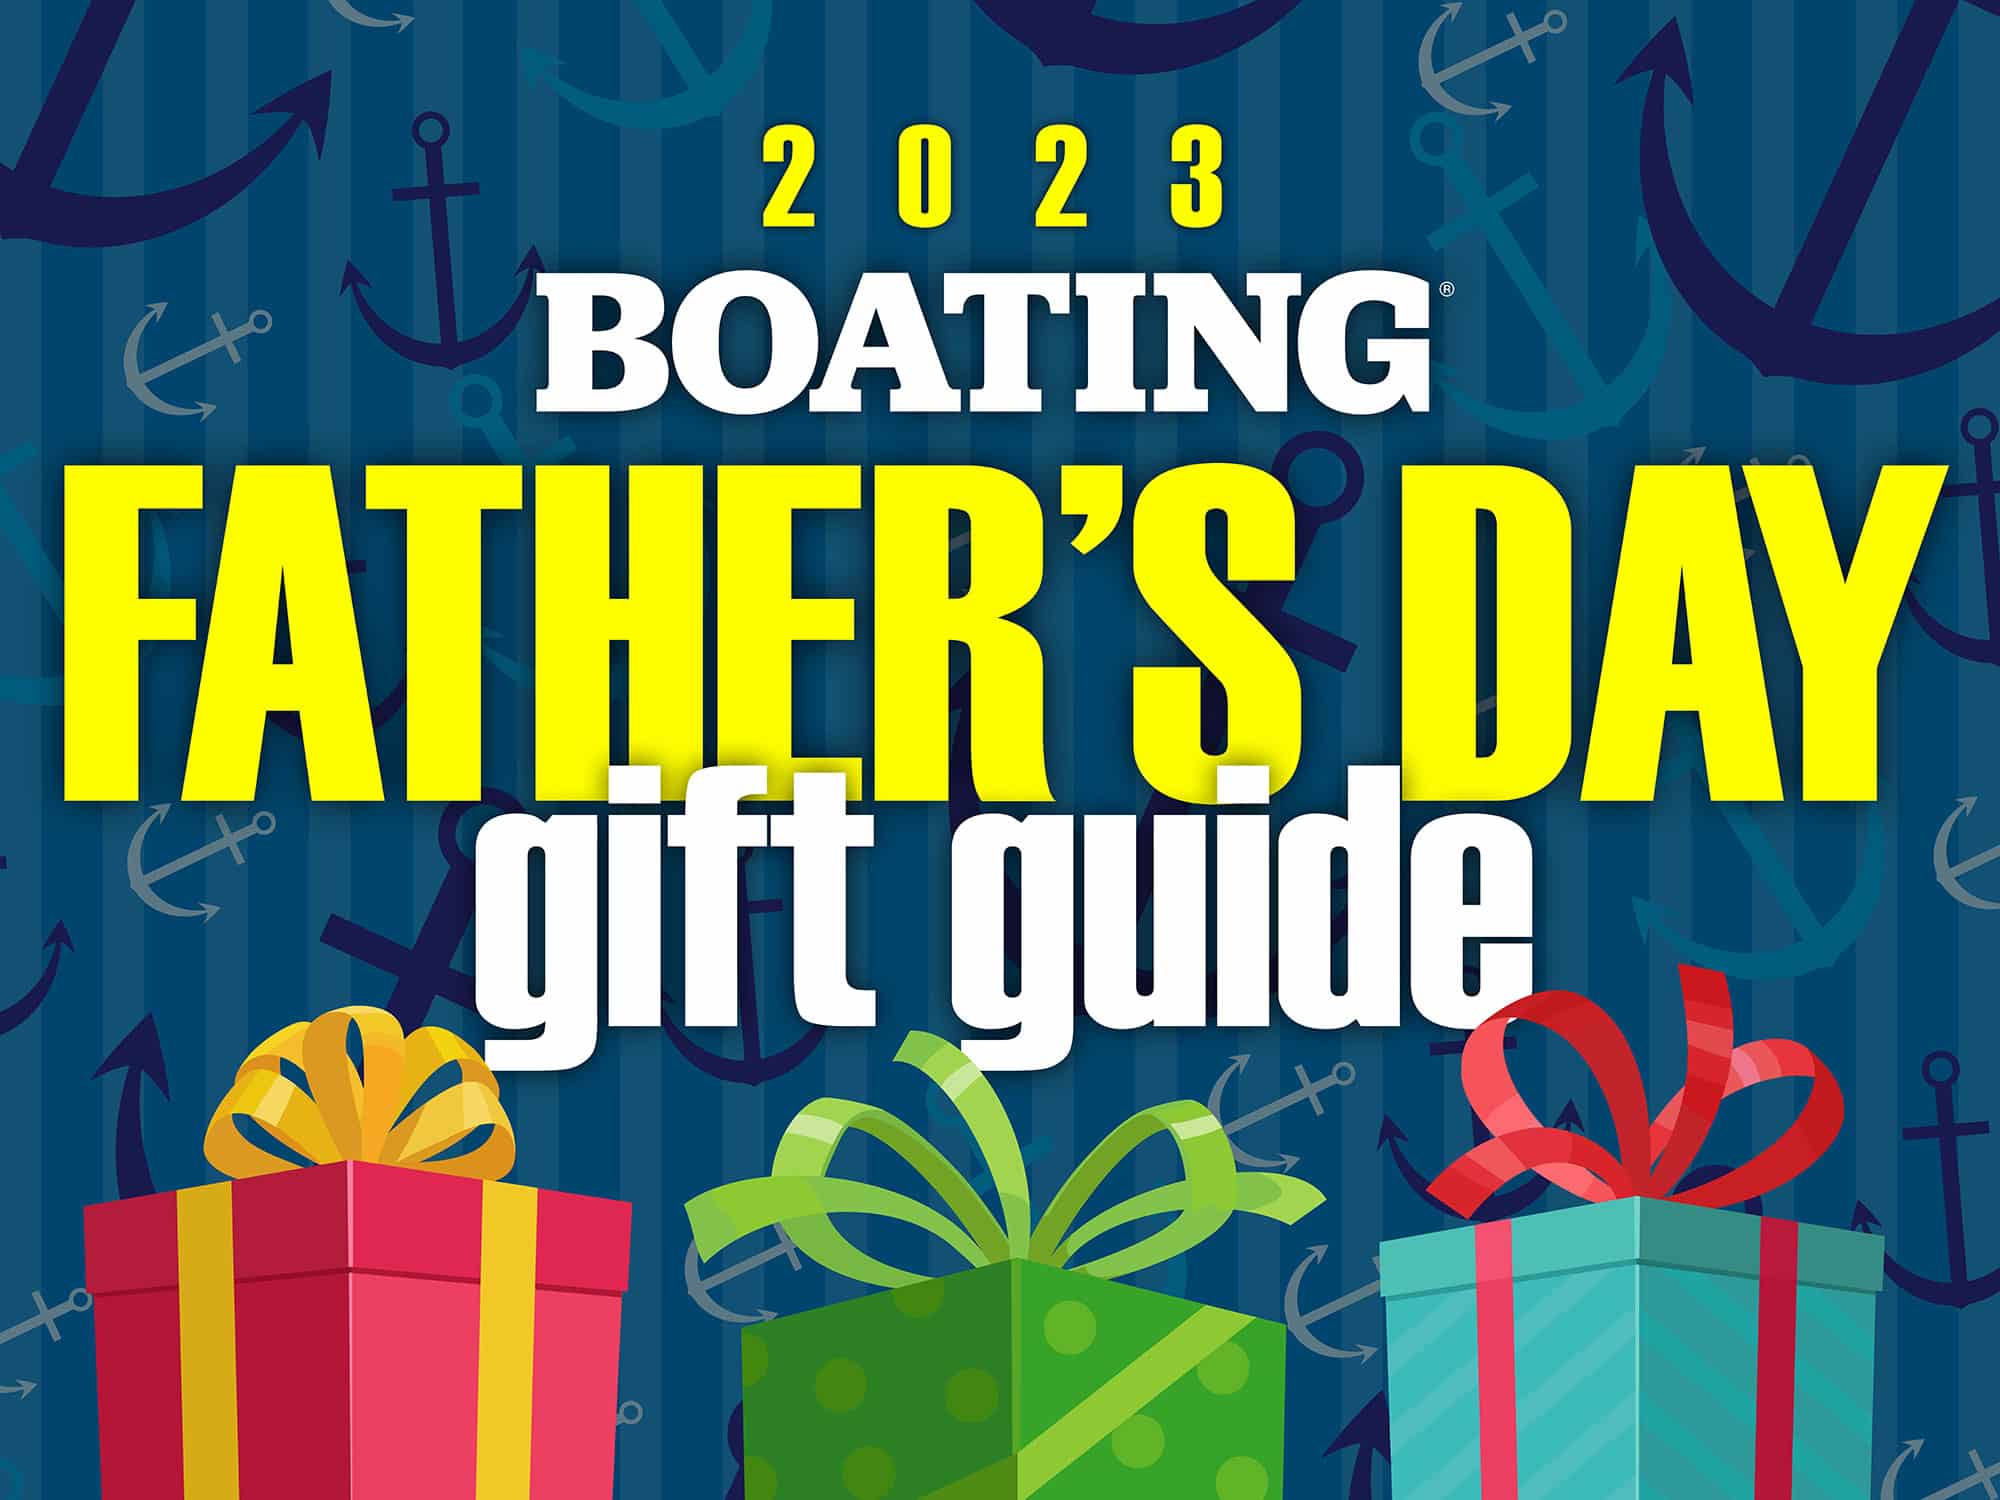 Father's Day Boating Gift Certificate, Boating Gifts for Men, Sailing Gift  for Boaters, Boating Gifts Dad, Meaningful Dad Gift From Kids -  Canada